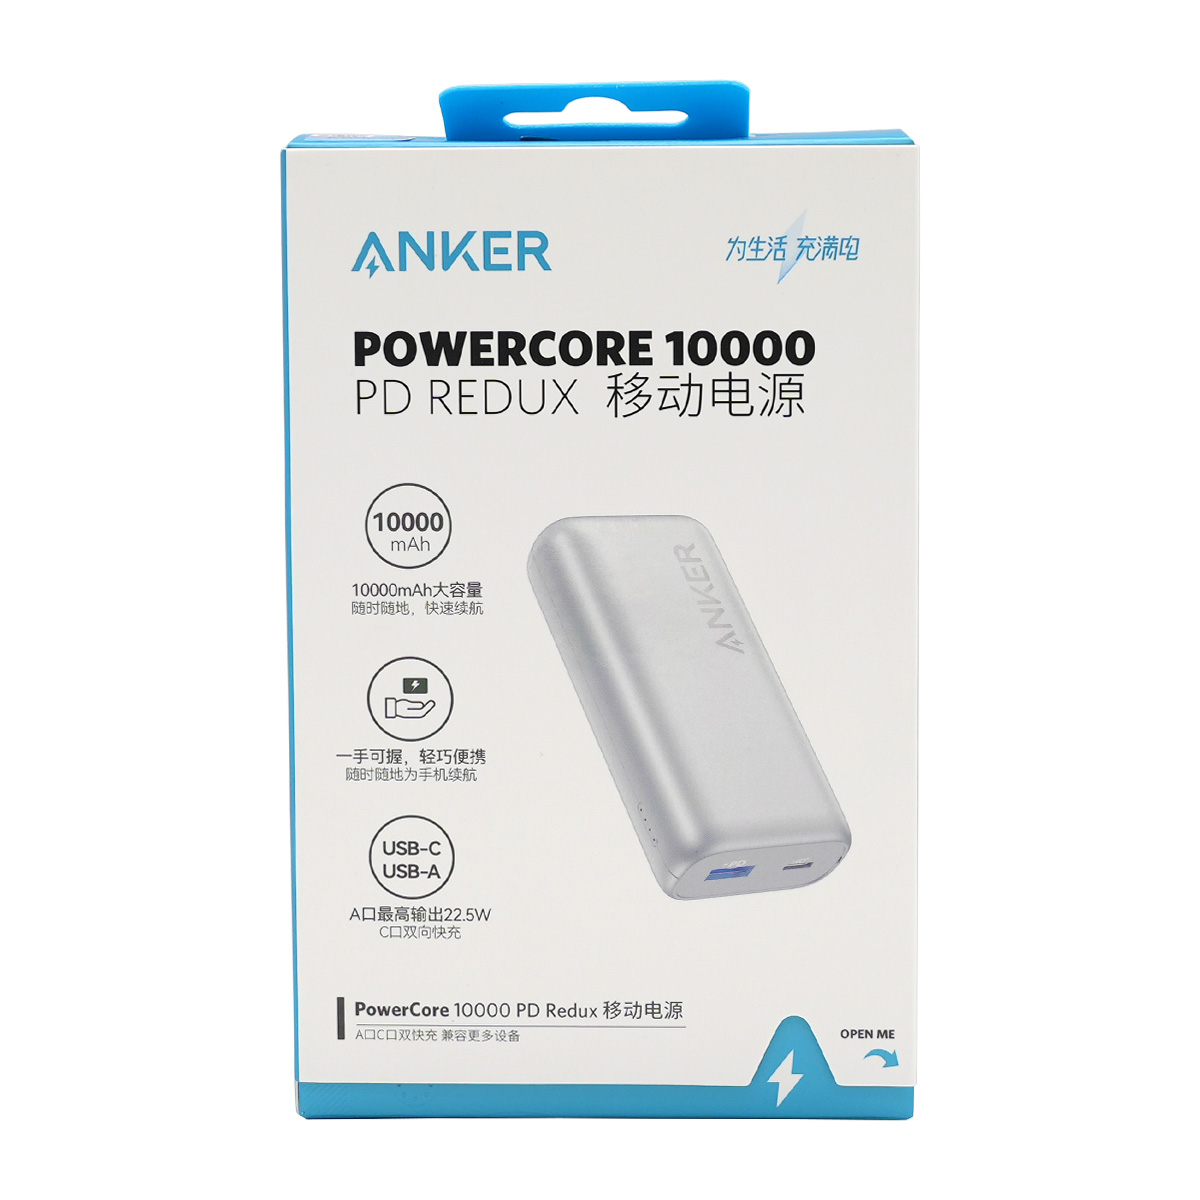 Anker 10000 PD Redux - The Portable Power Charger | Lazada